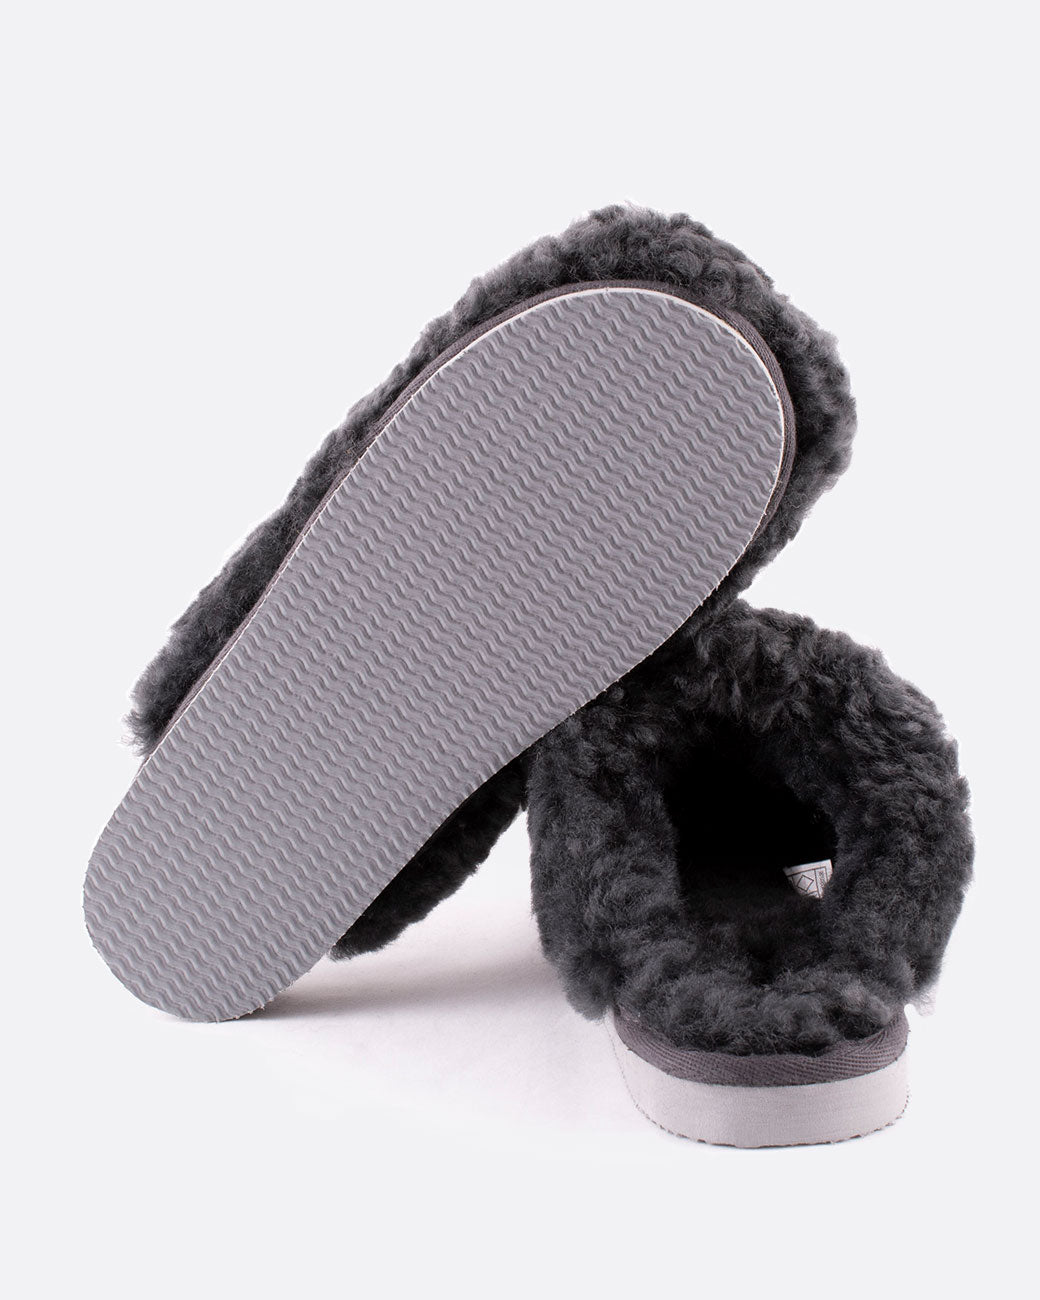 Jenny sheepskin slippers in charcoal gray, shown from the bottom